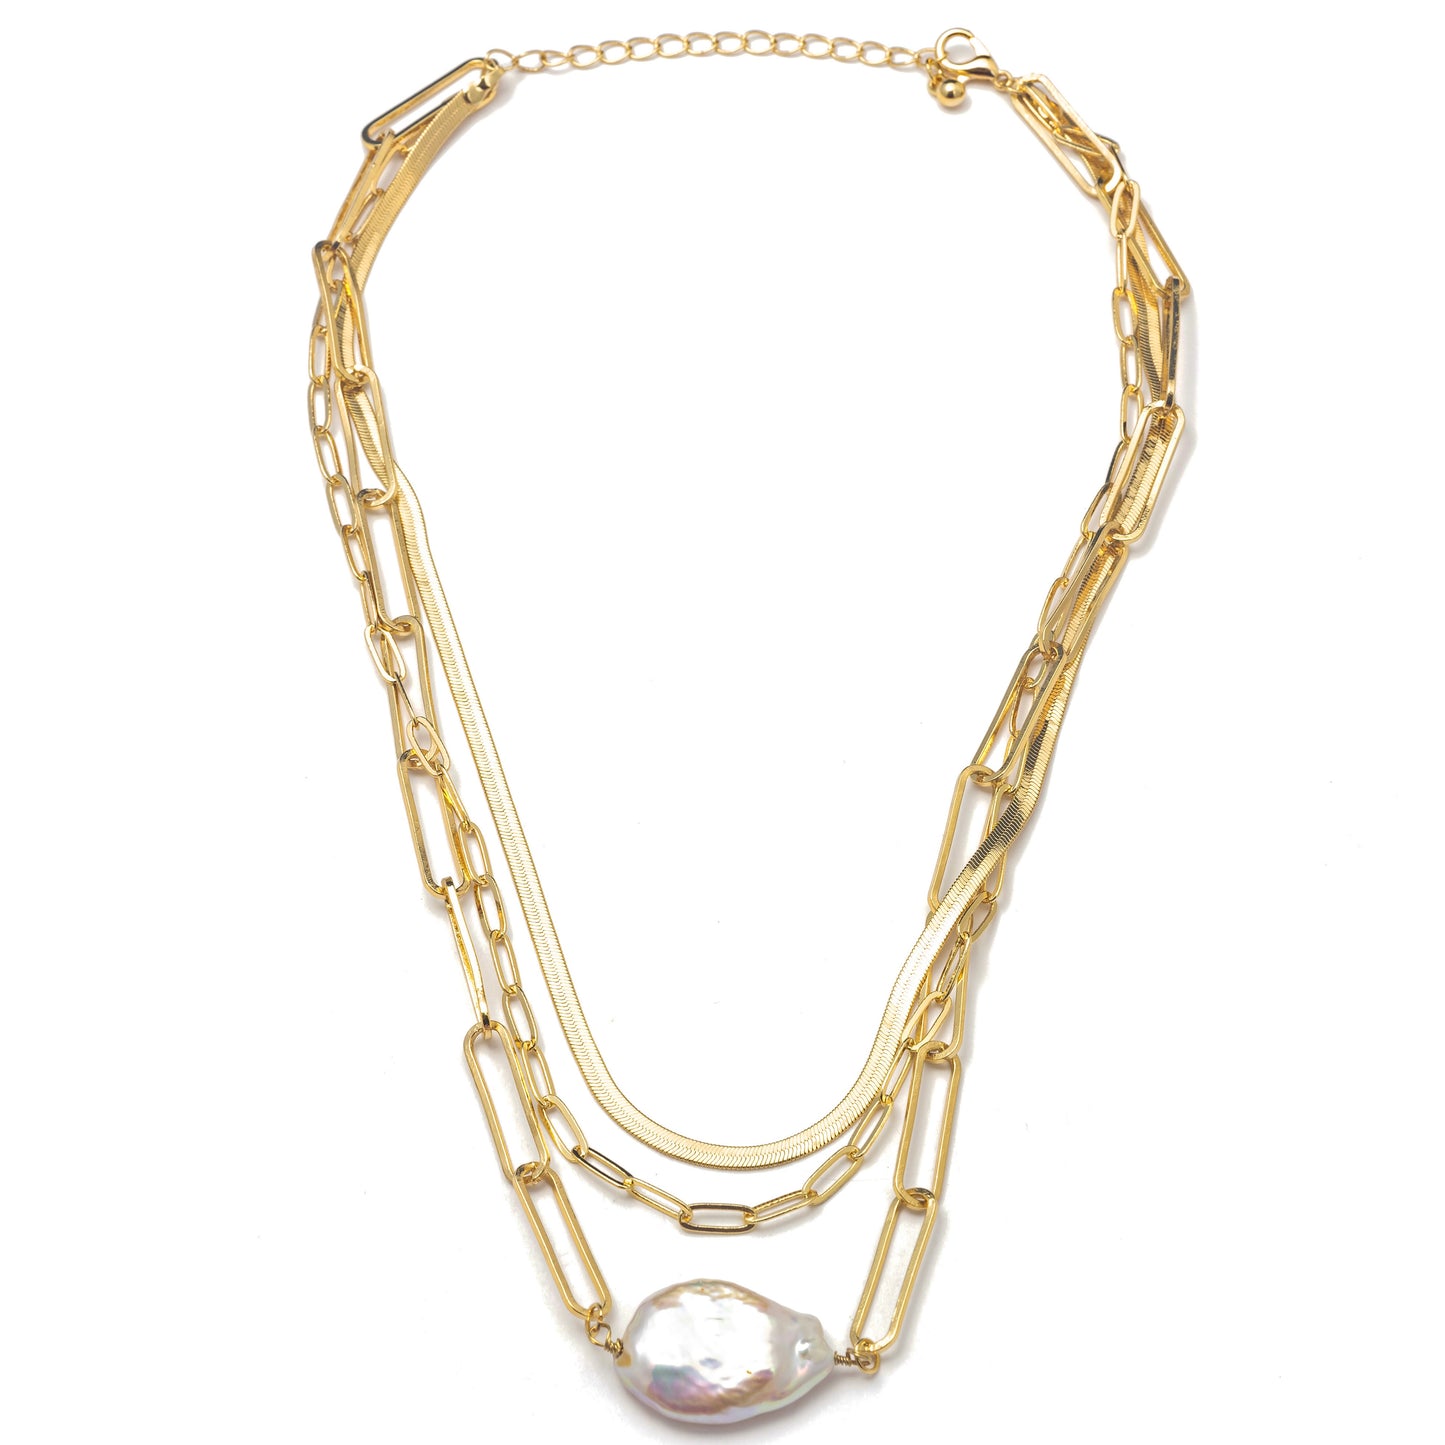 CHAIN LINK PEARL NECKLACE